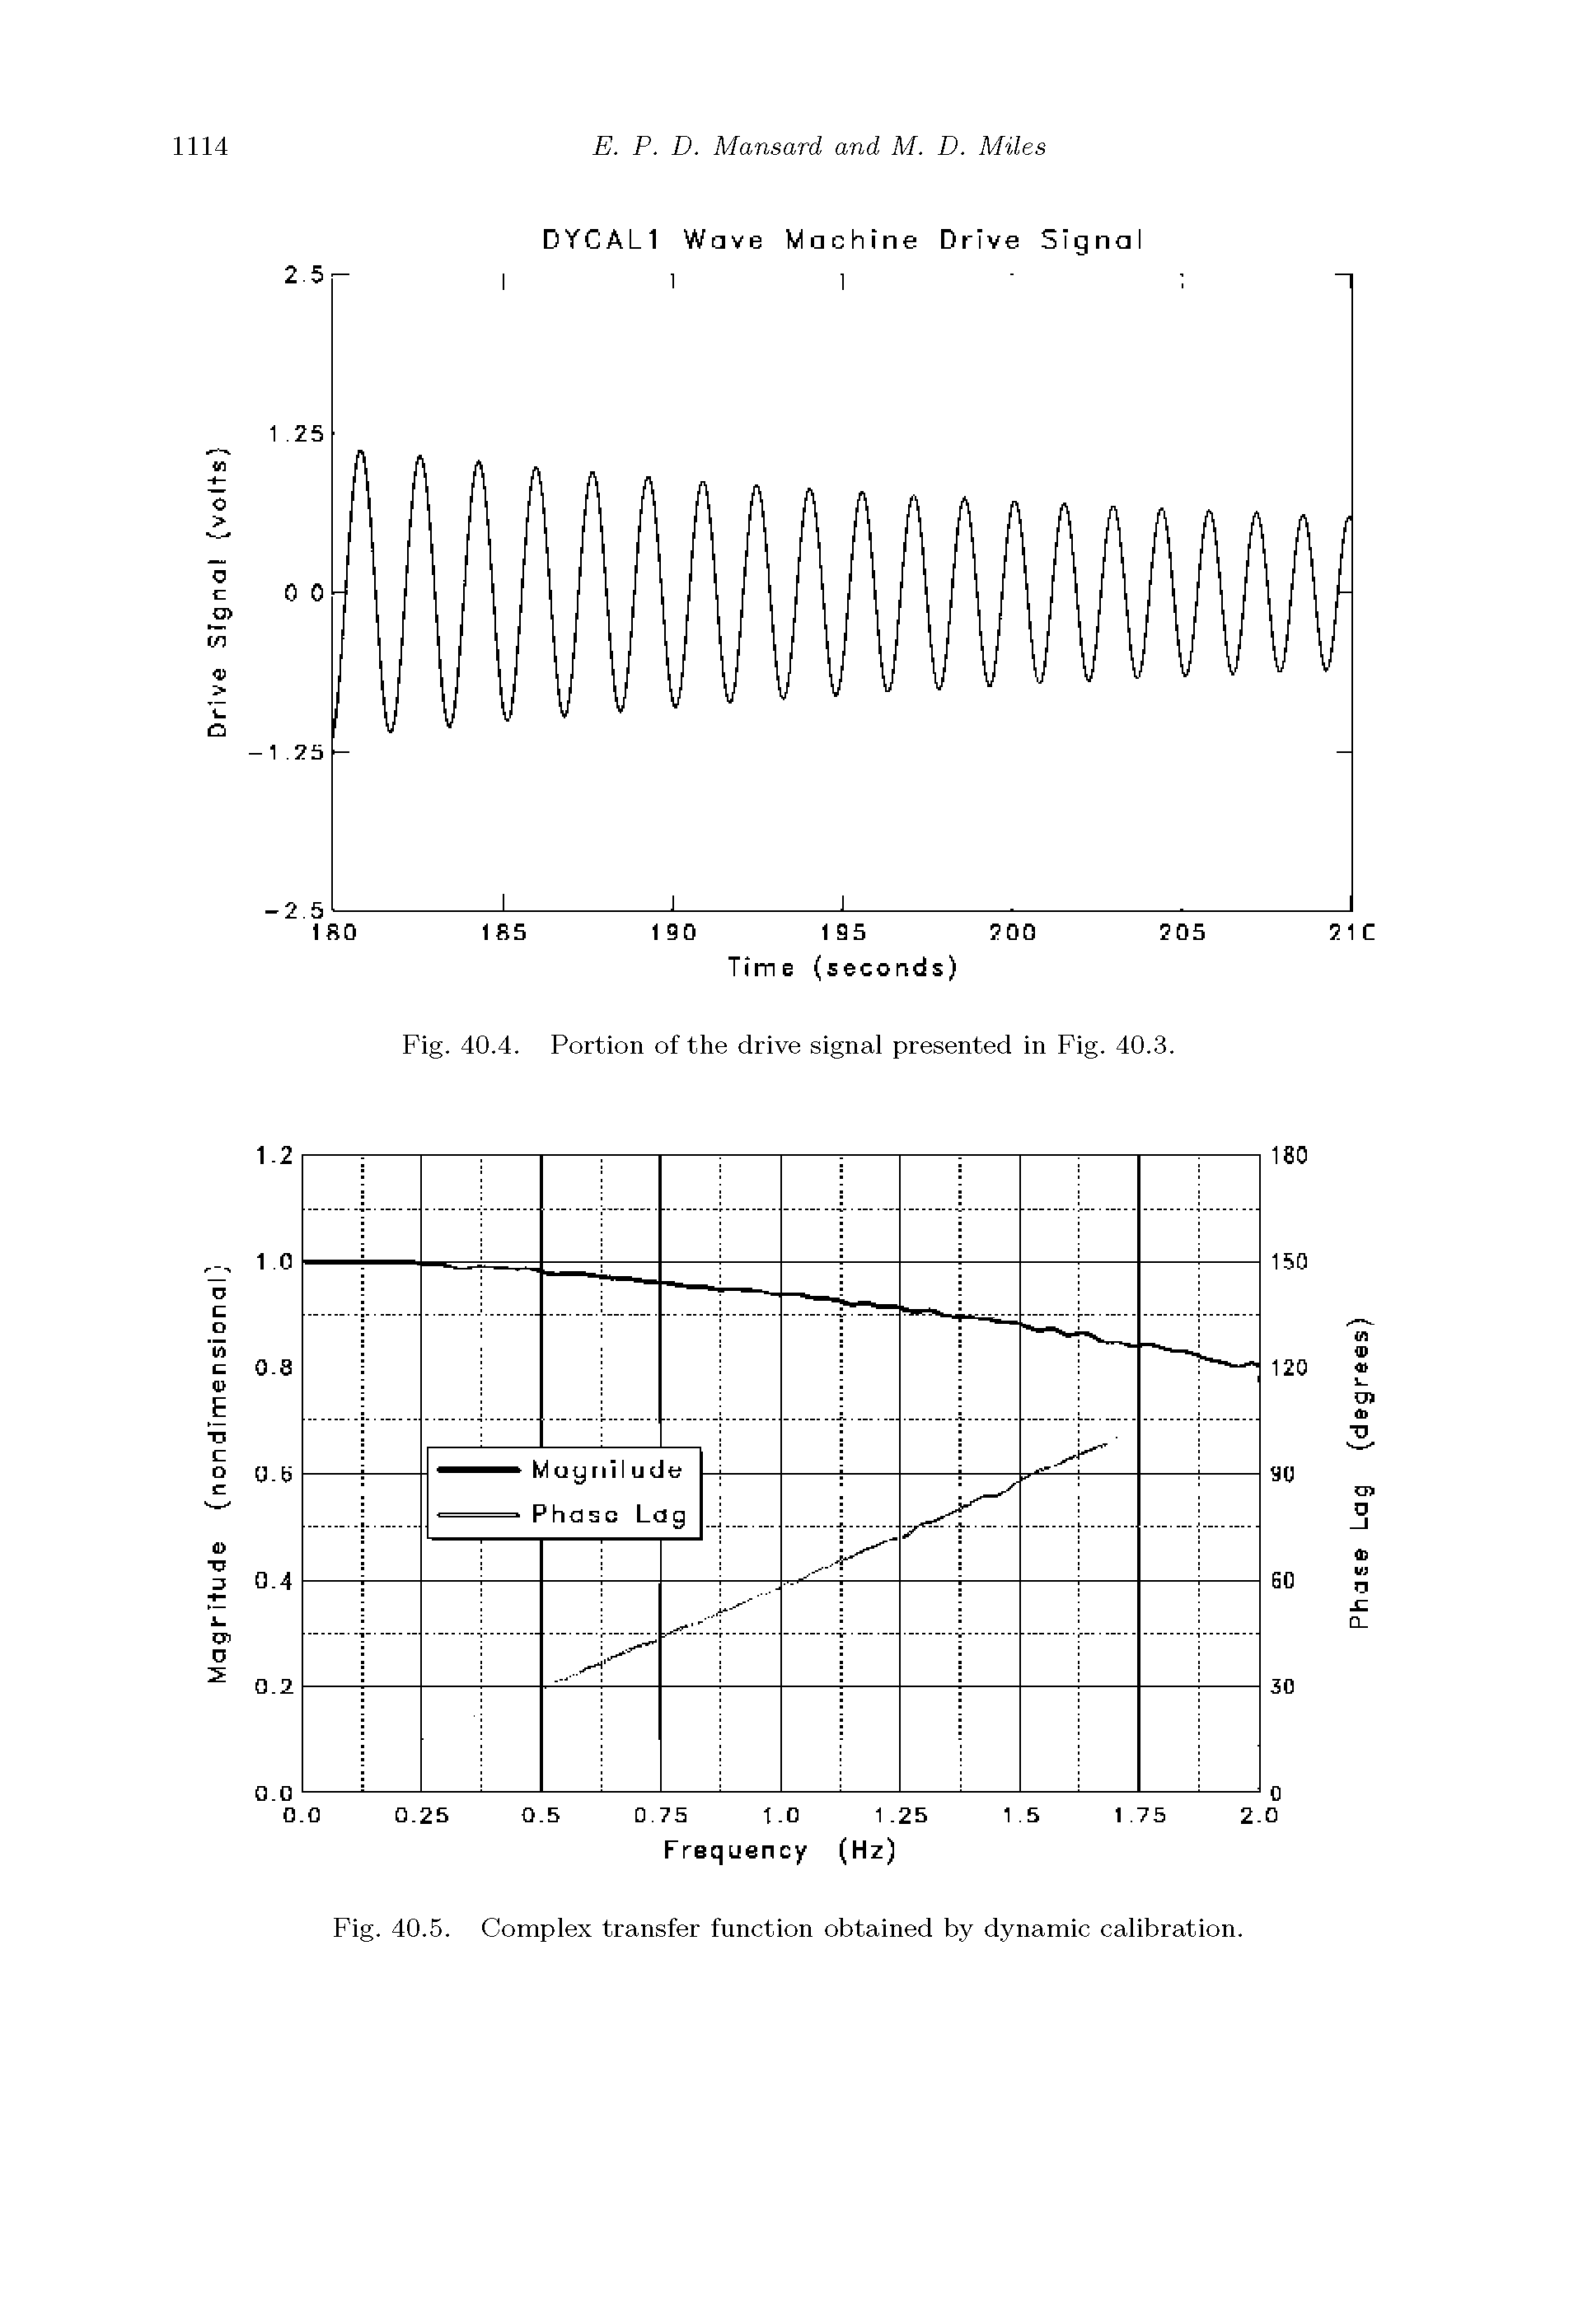 Fig. 40.5. Complex transfer function obtained by dynamic calibration.